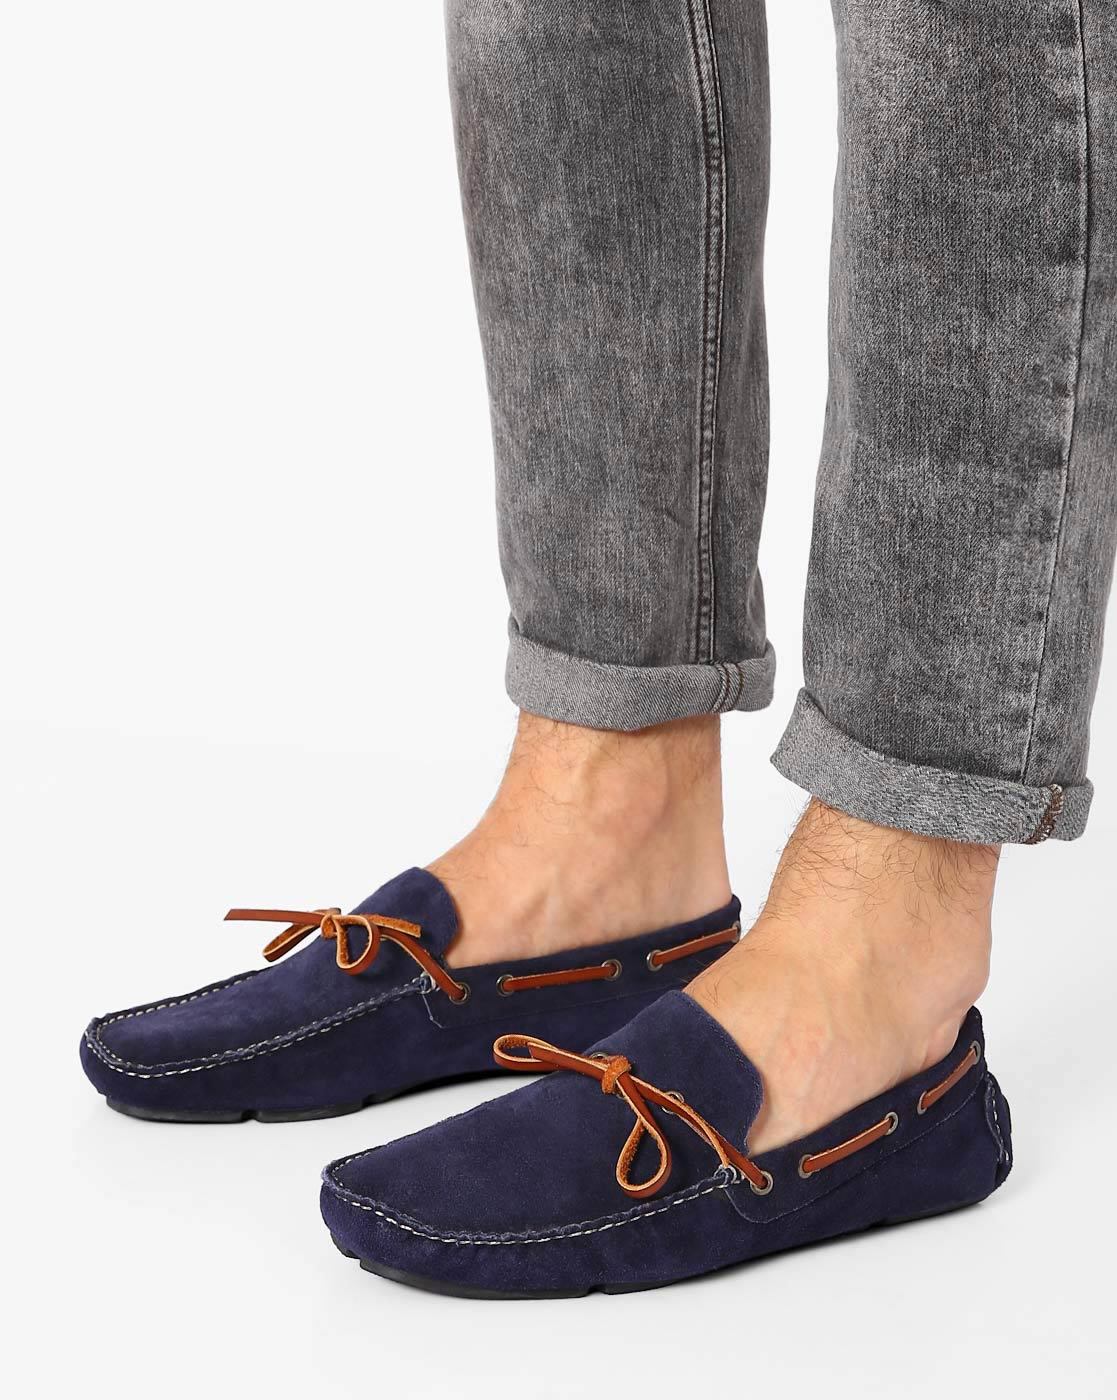 Unlined Capri Suede Loafer - Navy